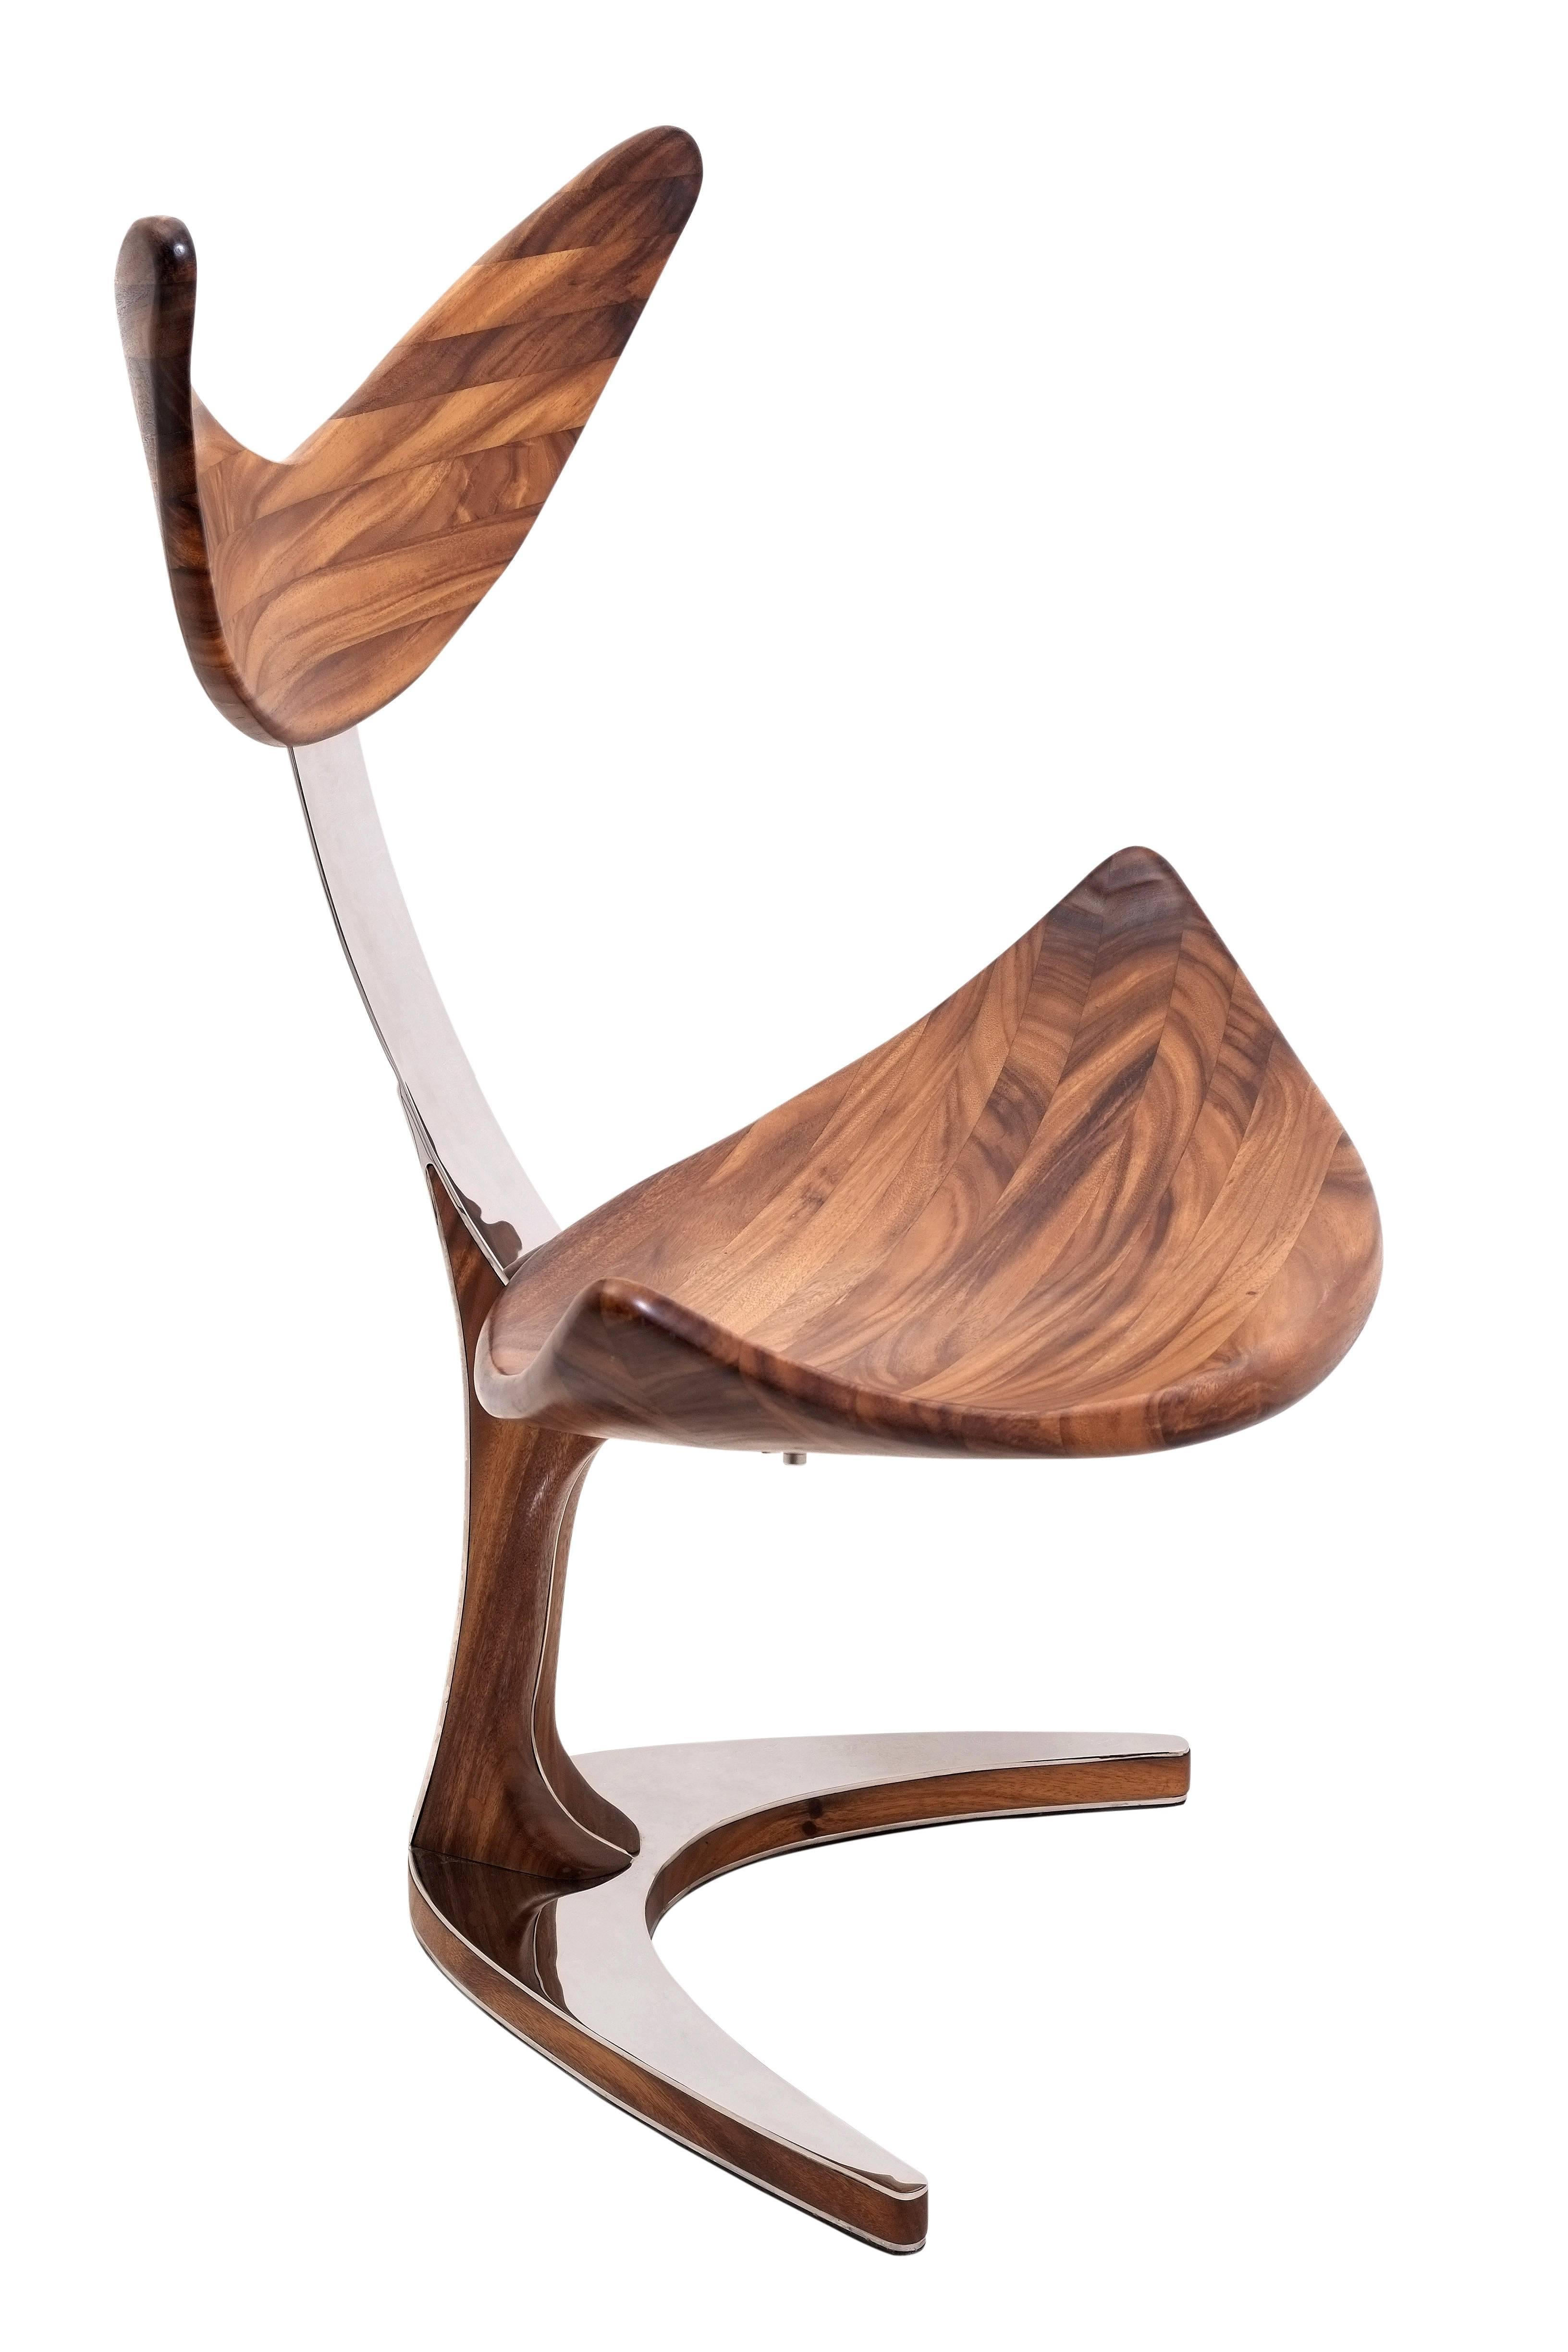 Organic Modern Whale Chair from Suar Wood with Mirror Polished Stainless Steel, Saturday Sale For Sale